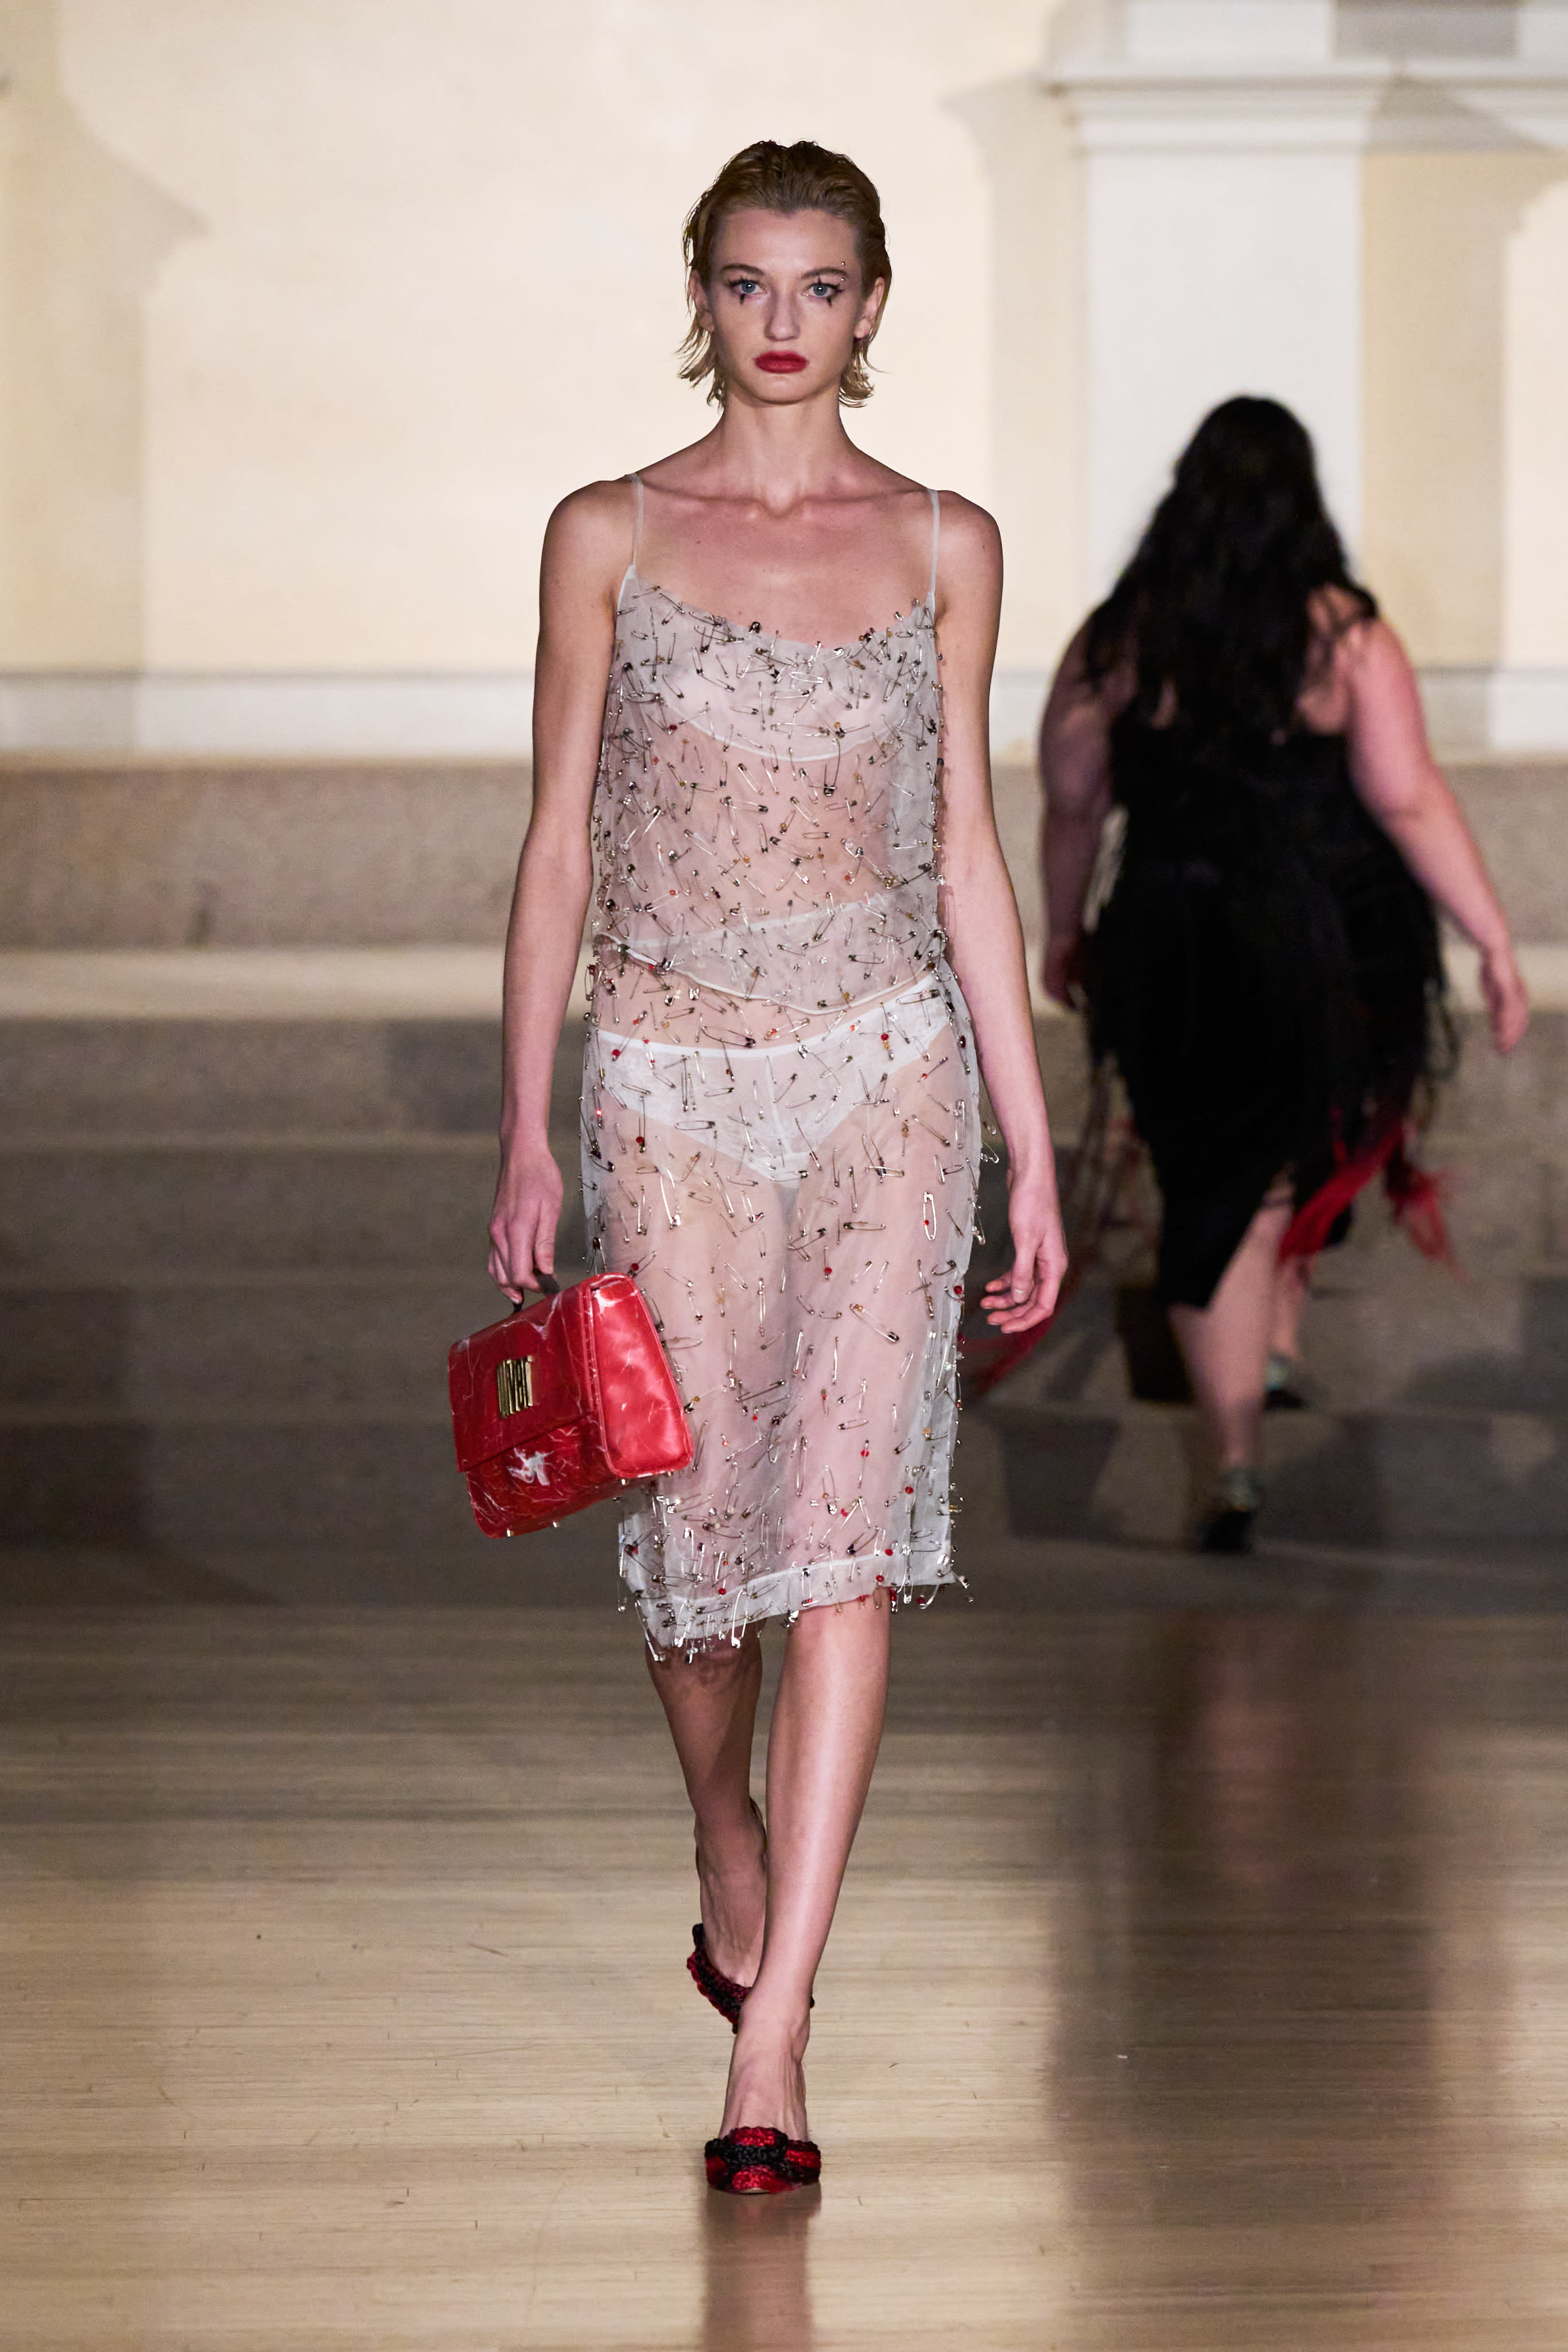 a woman walking down a runway wearing a sheer dress with commonly found objects like safety pins and forks on it.